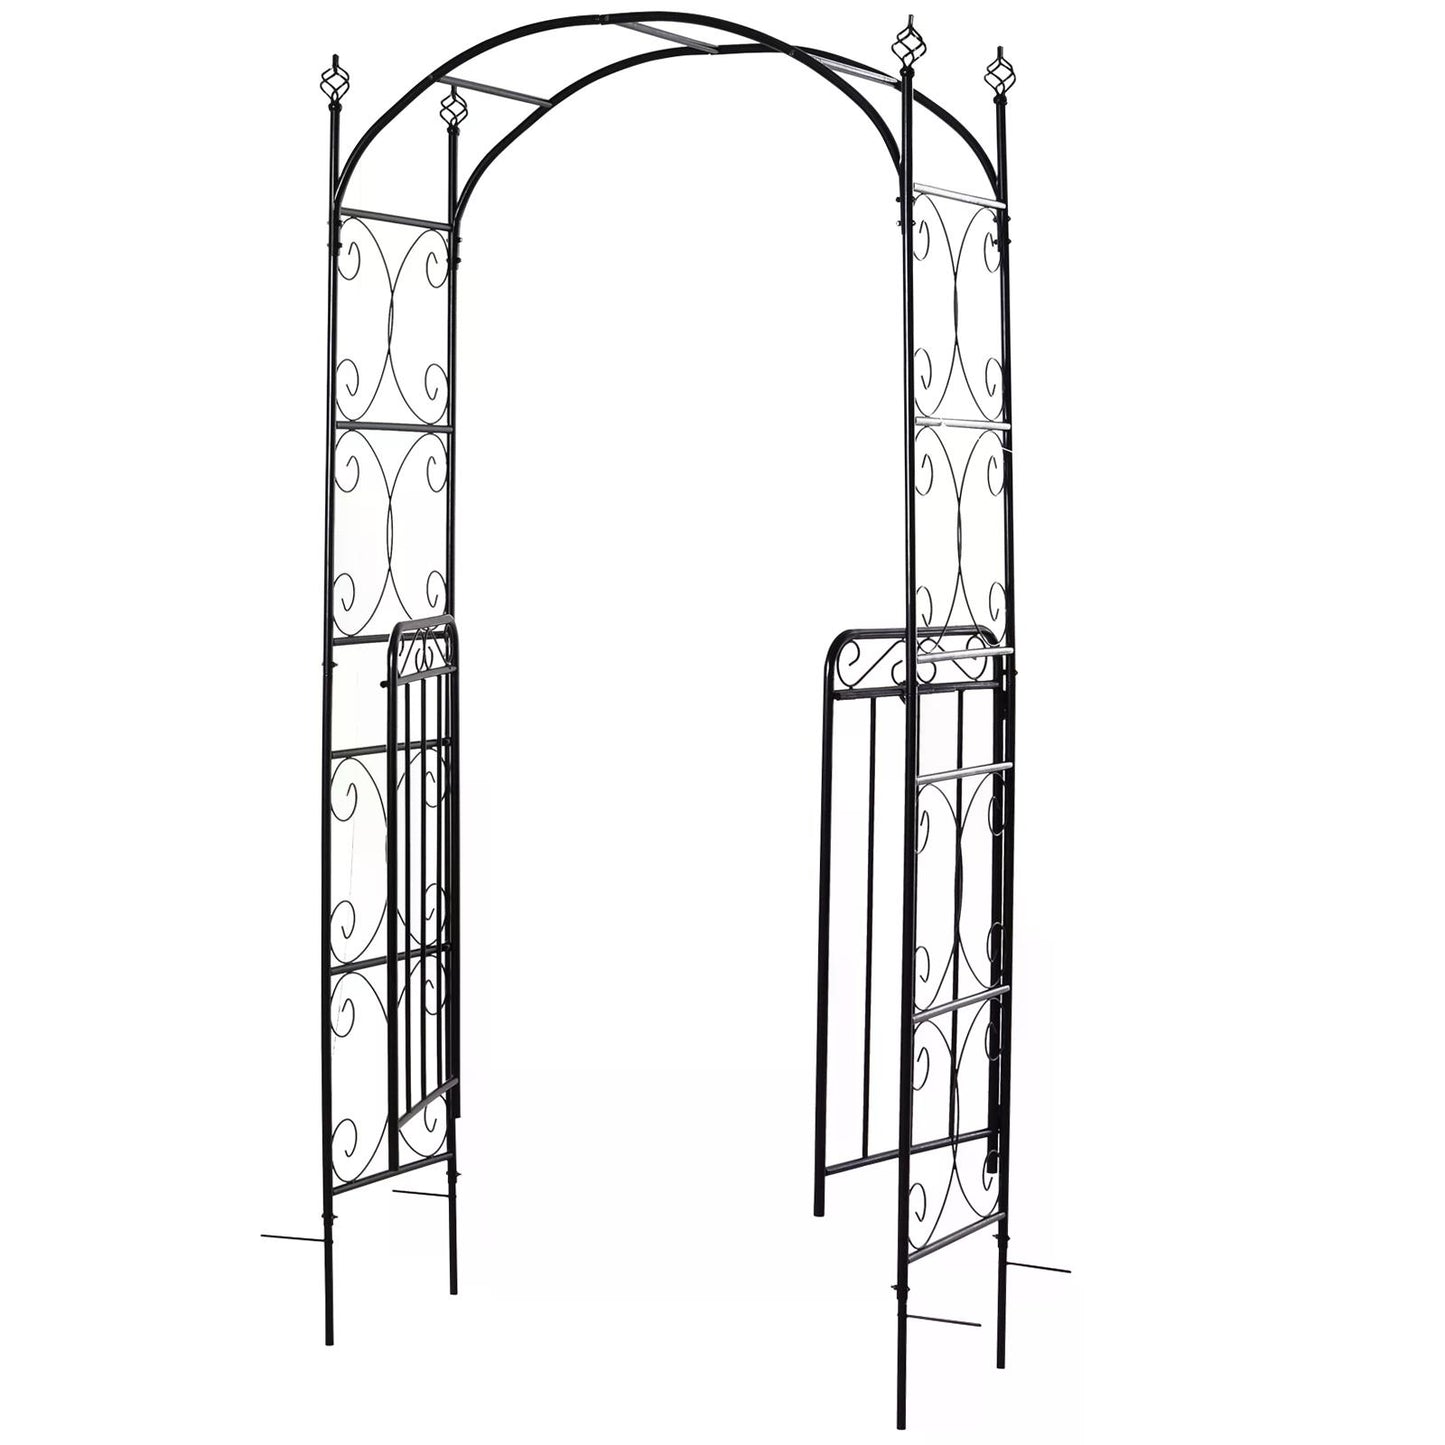 Outsunny Garden Decorative Metal Arch with Gate Outdoor Patio Trellis Arbor for Climbing Plant Archway Antique Black - 108L x 45W x 215Hcm